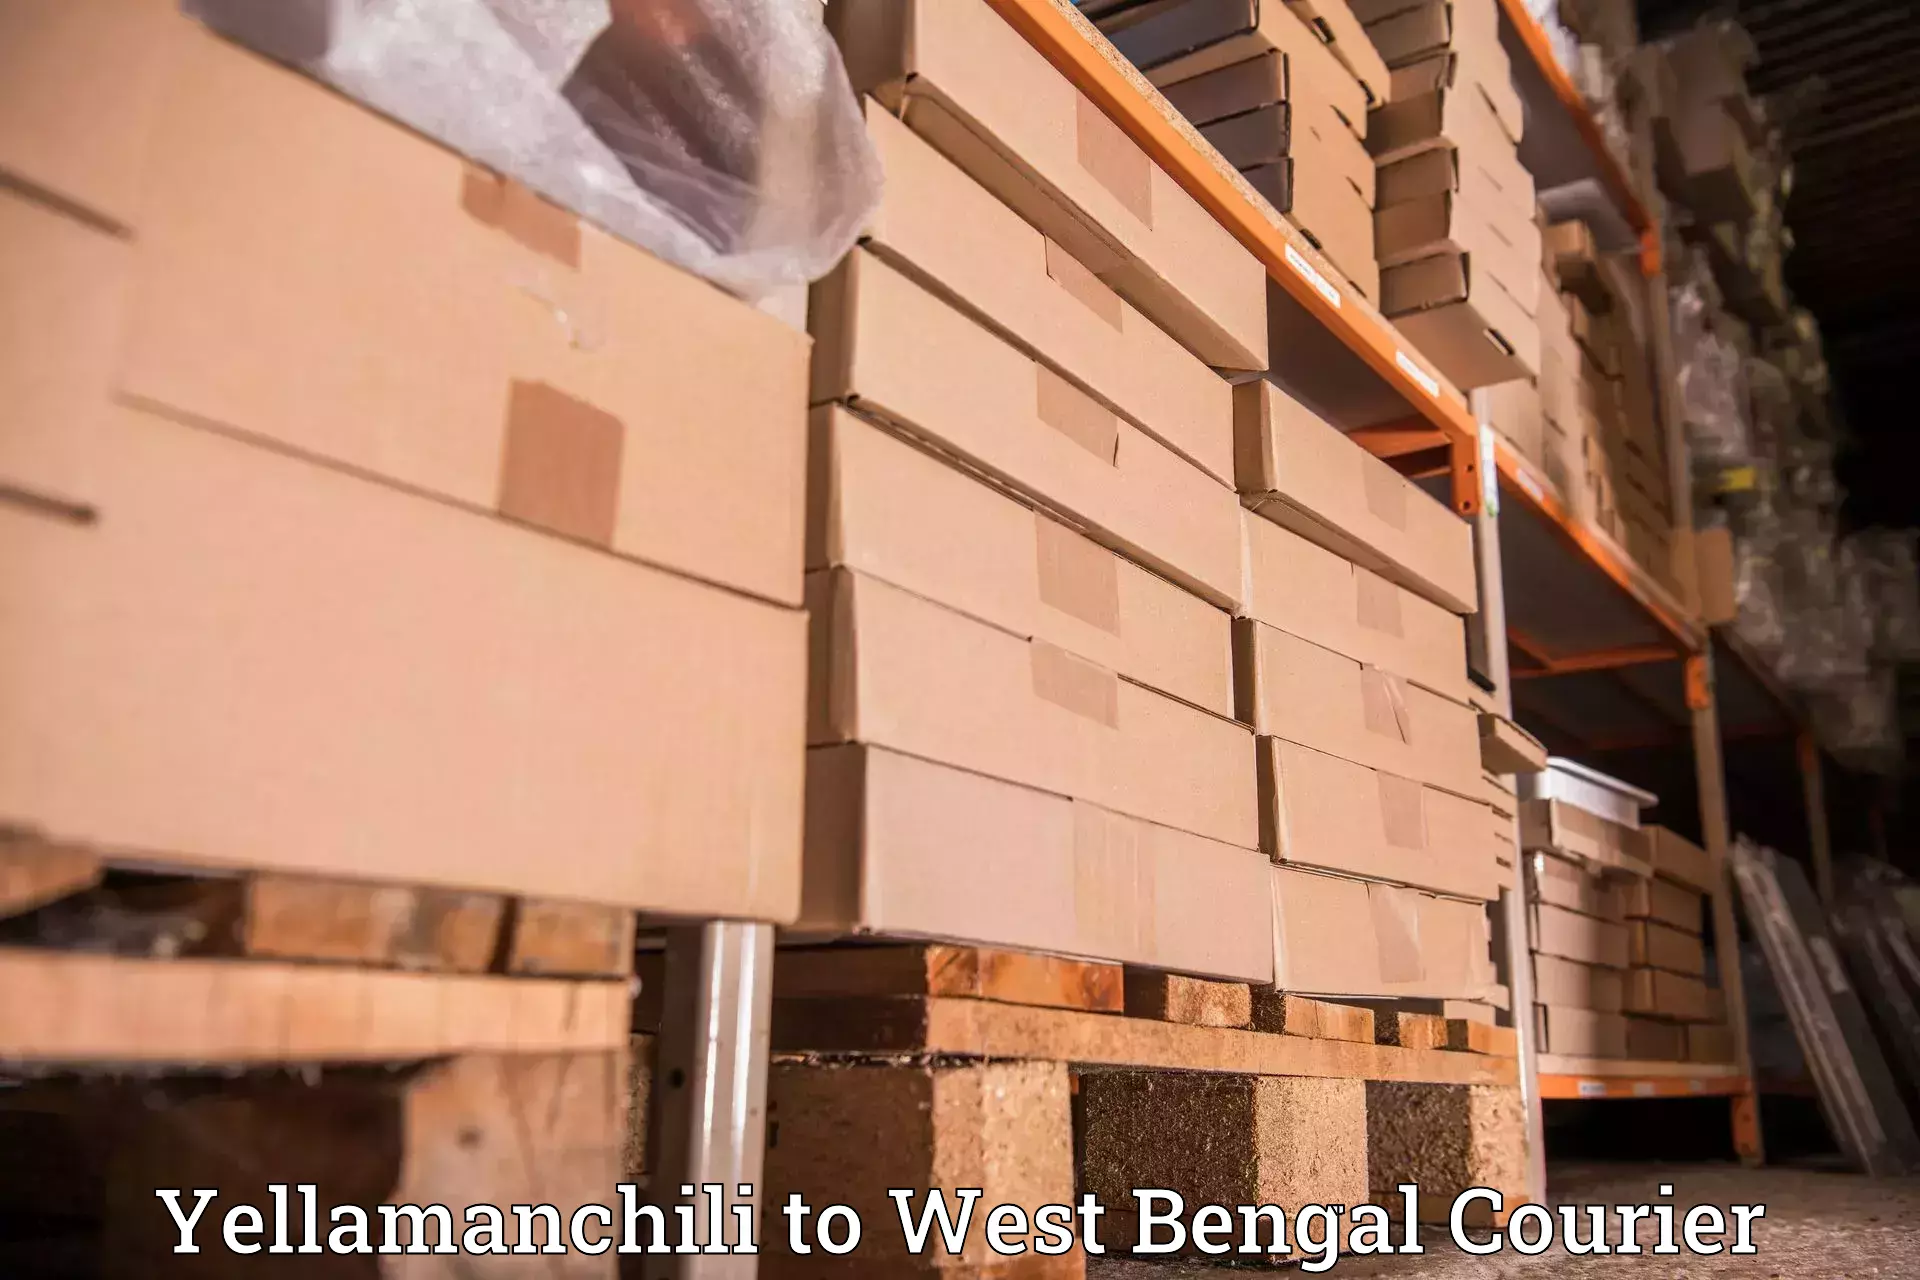 Global courier networks Yellamanchili to Cossipore